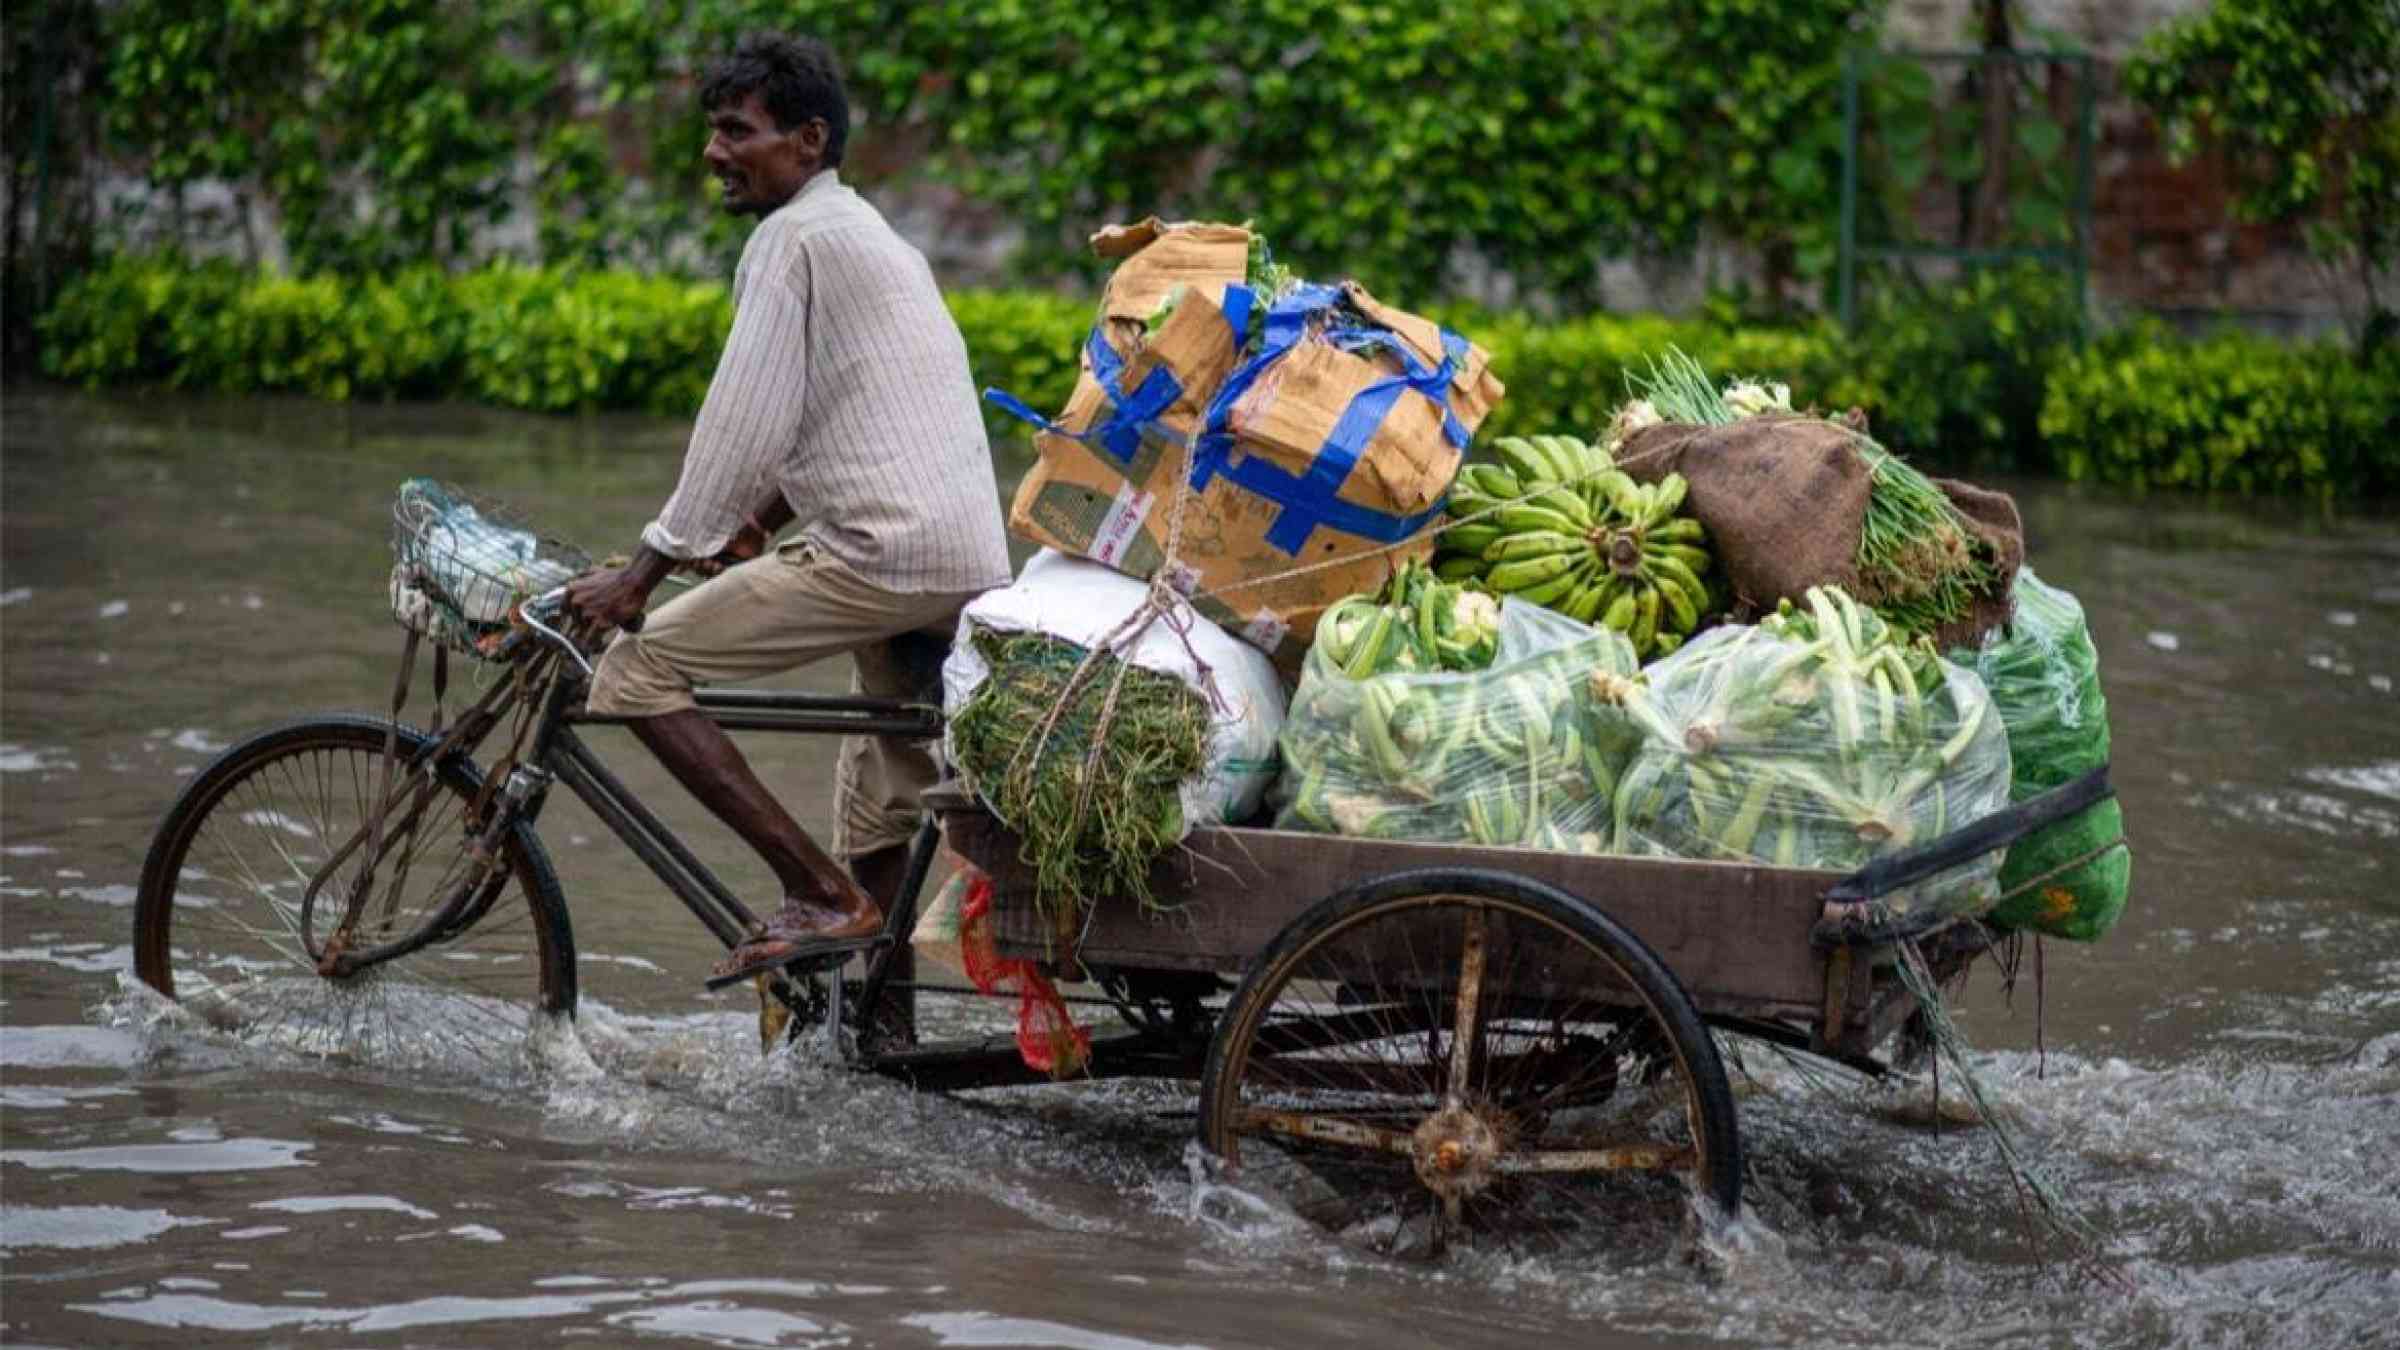 Indian farmer transporting harvest goods on a bike in a flooded street